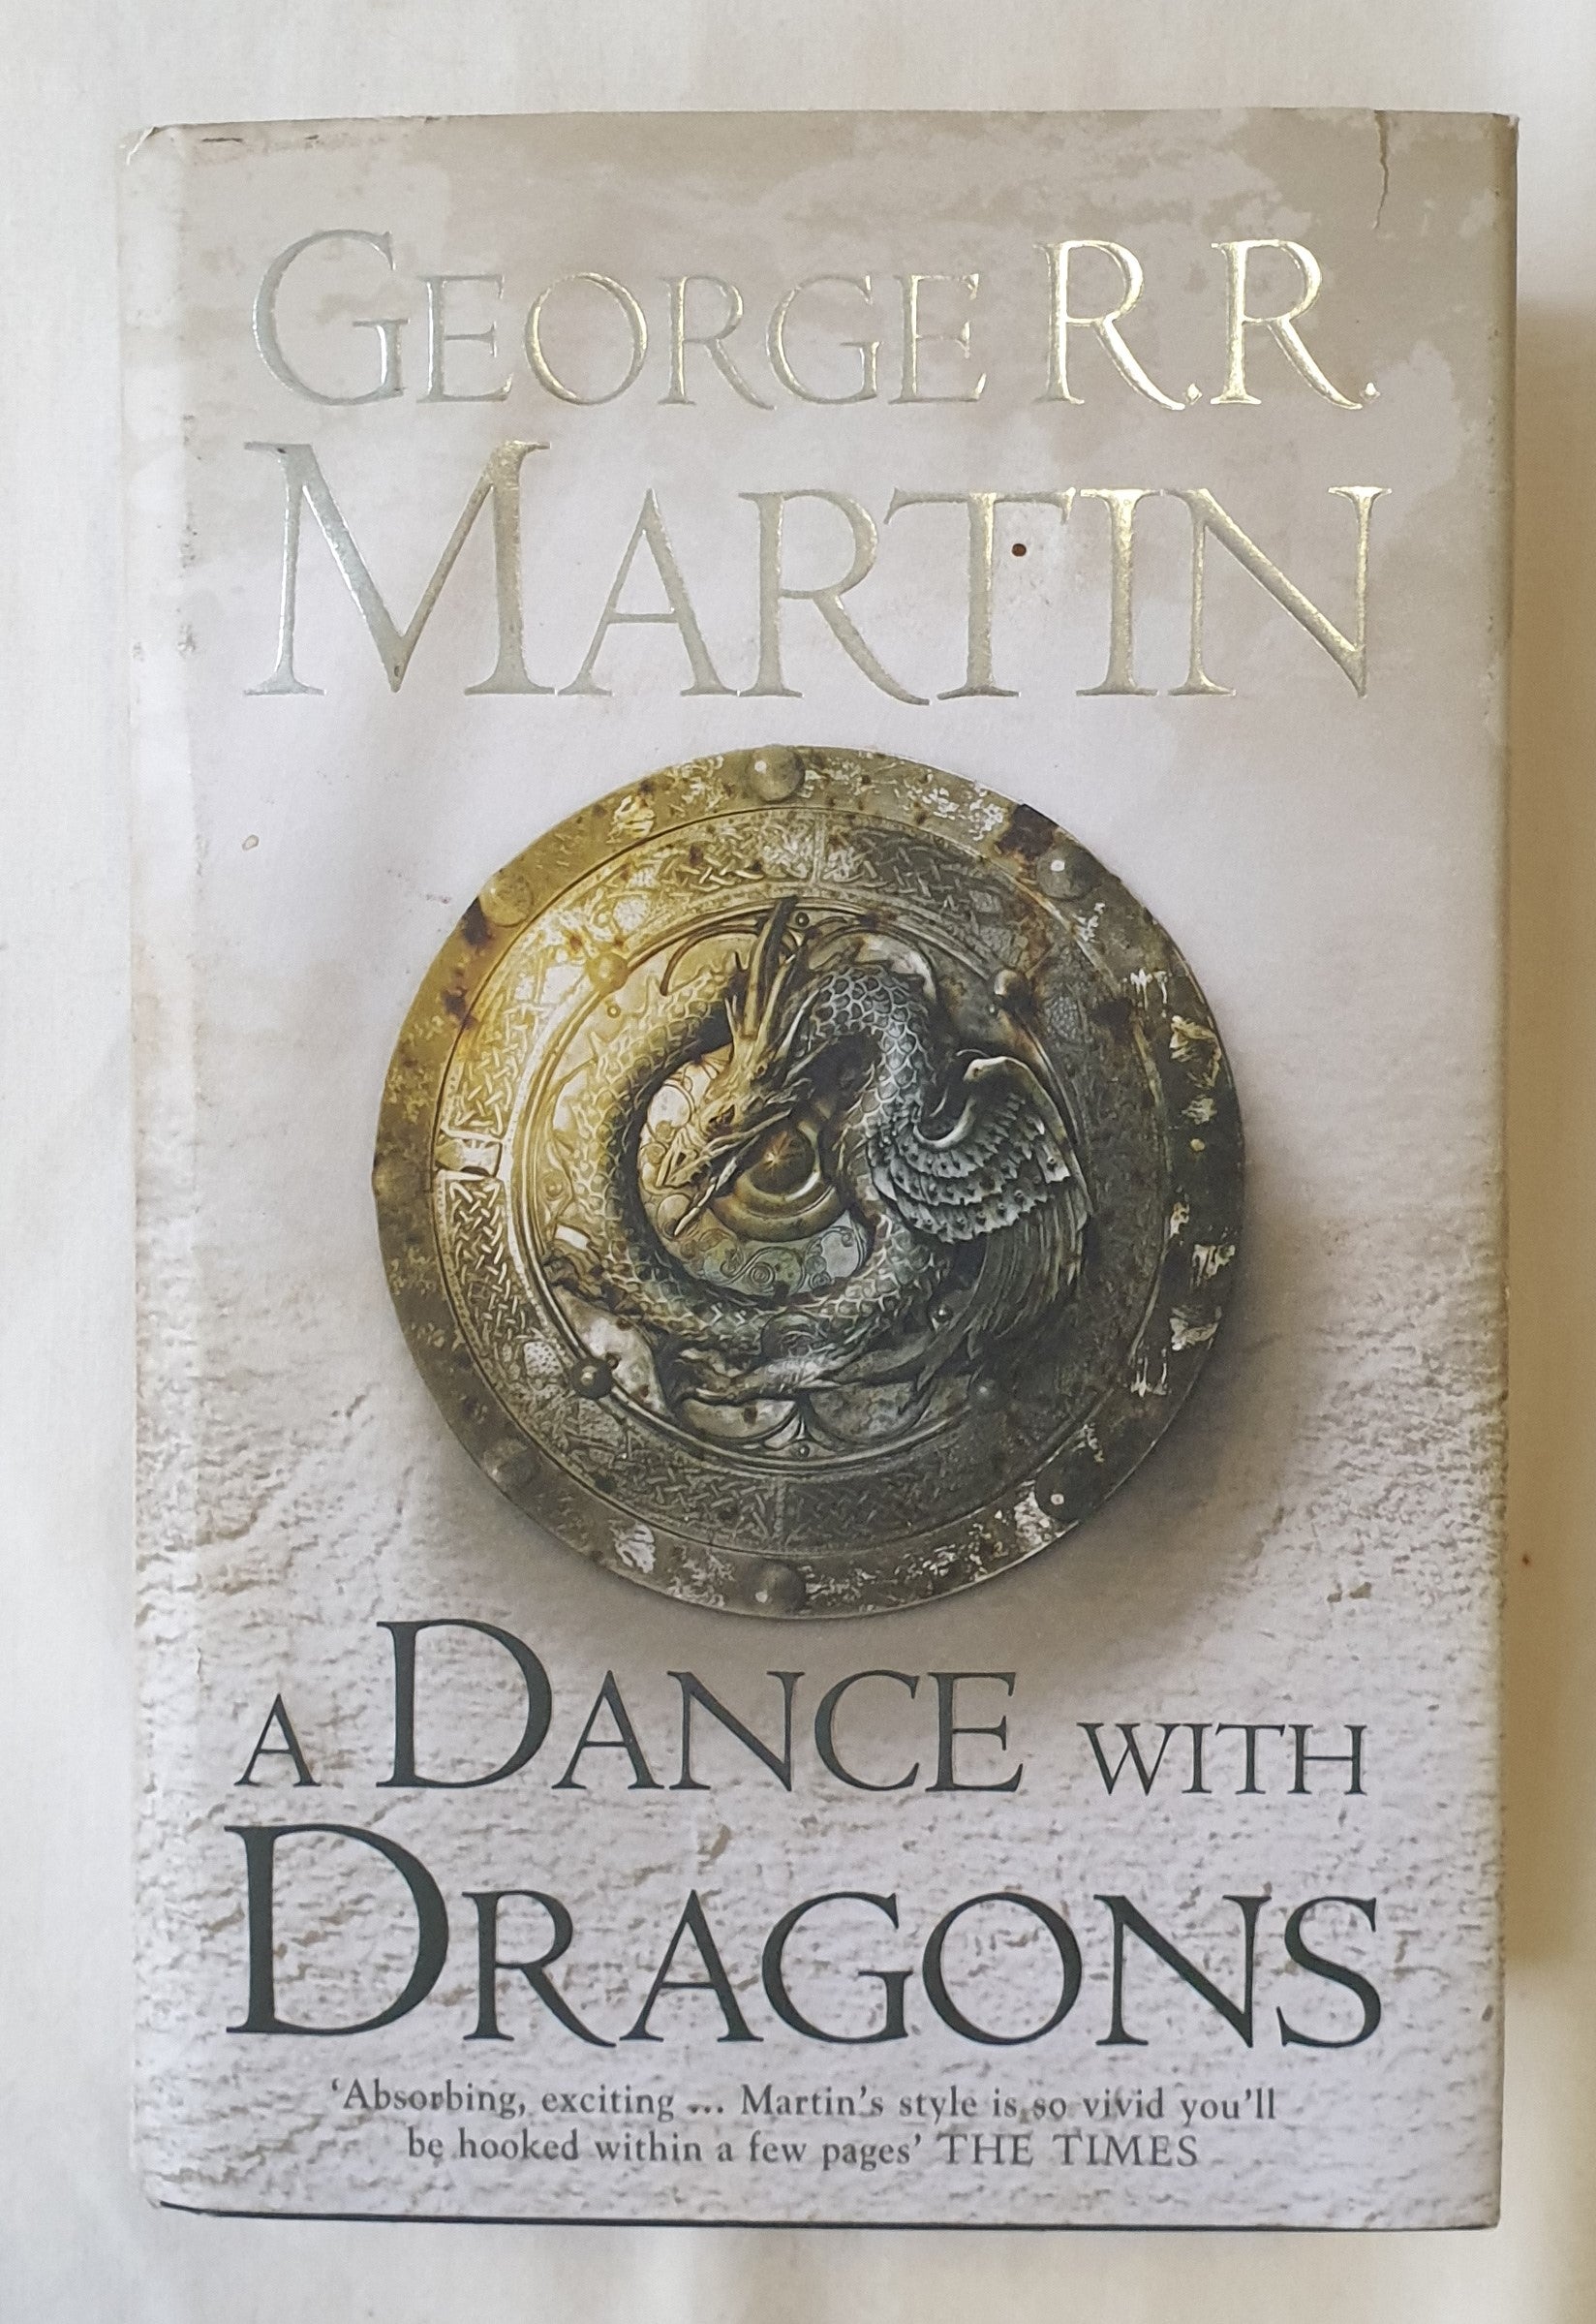 R.　Rare　Martin　by　Morgan's　–　George　R.　Books　With　Dance　A　Dragons